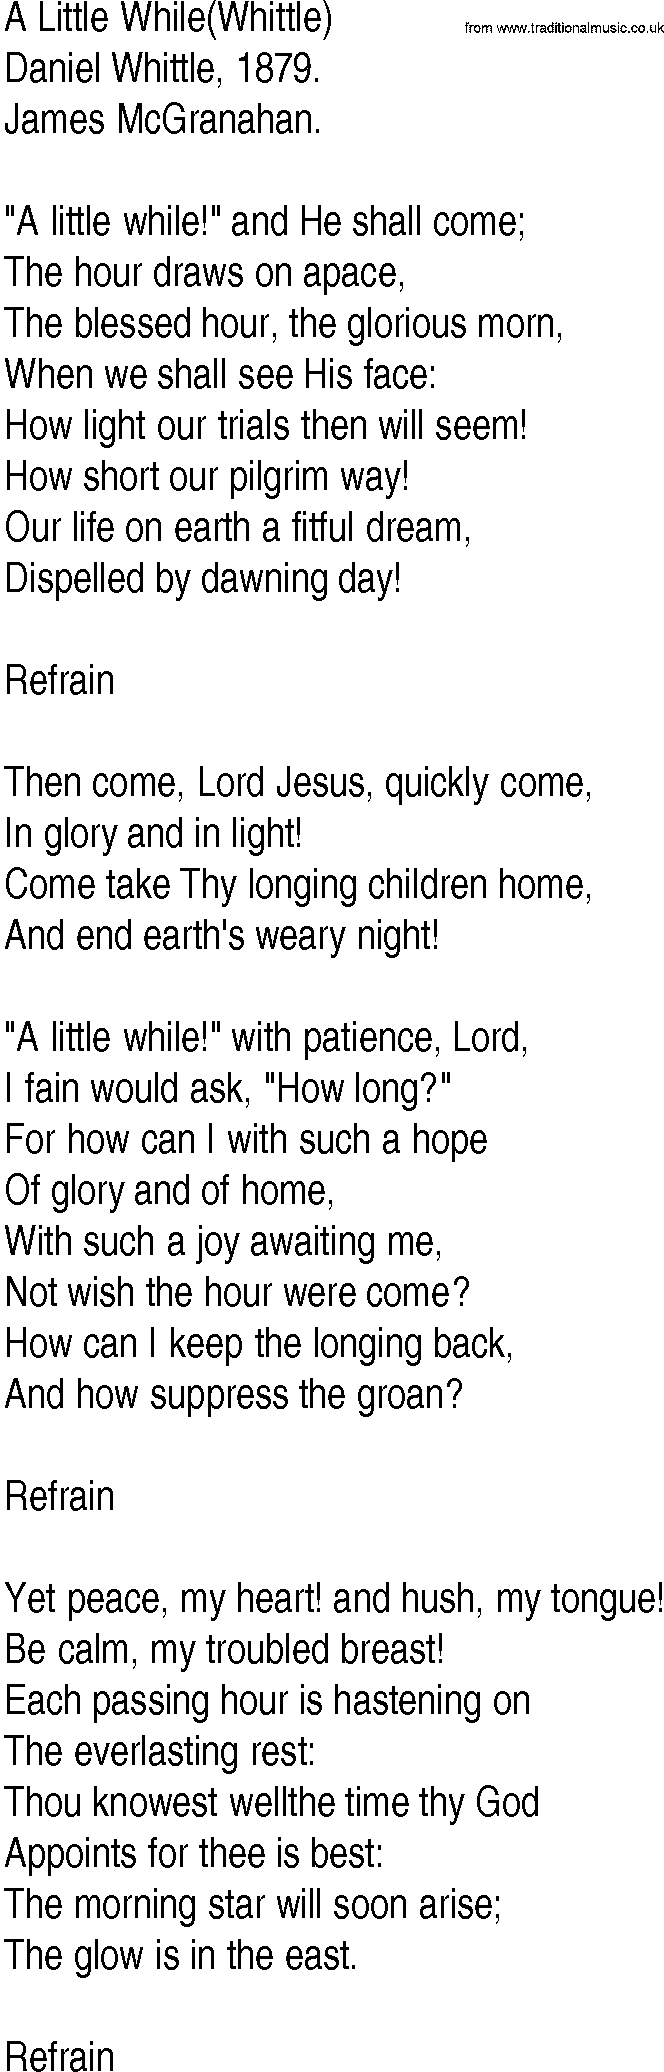 Hymn and Gospel Song: A Little While(Whittle) by Daniel Whittle lyrics